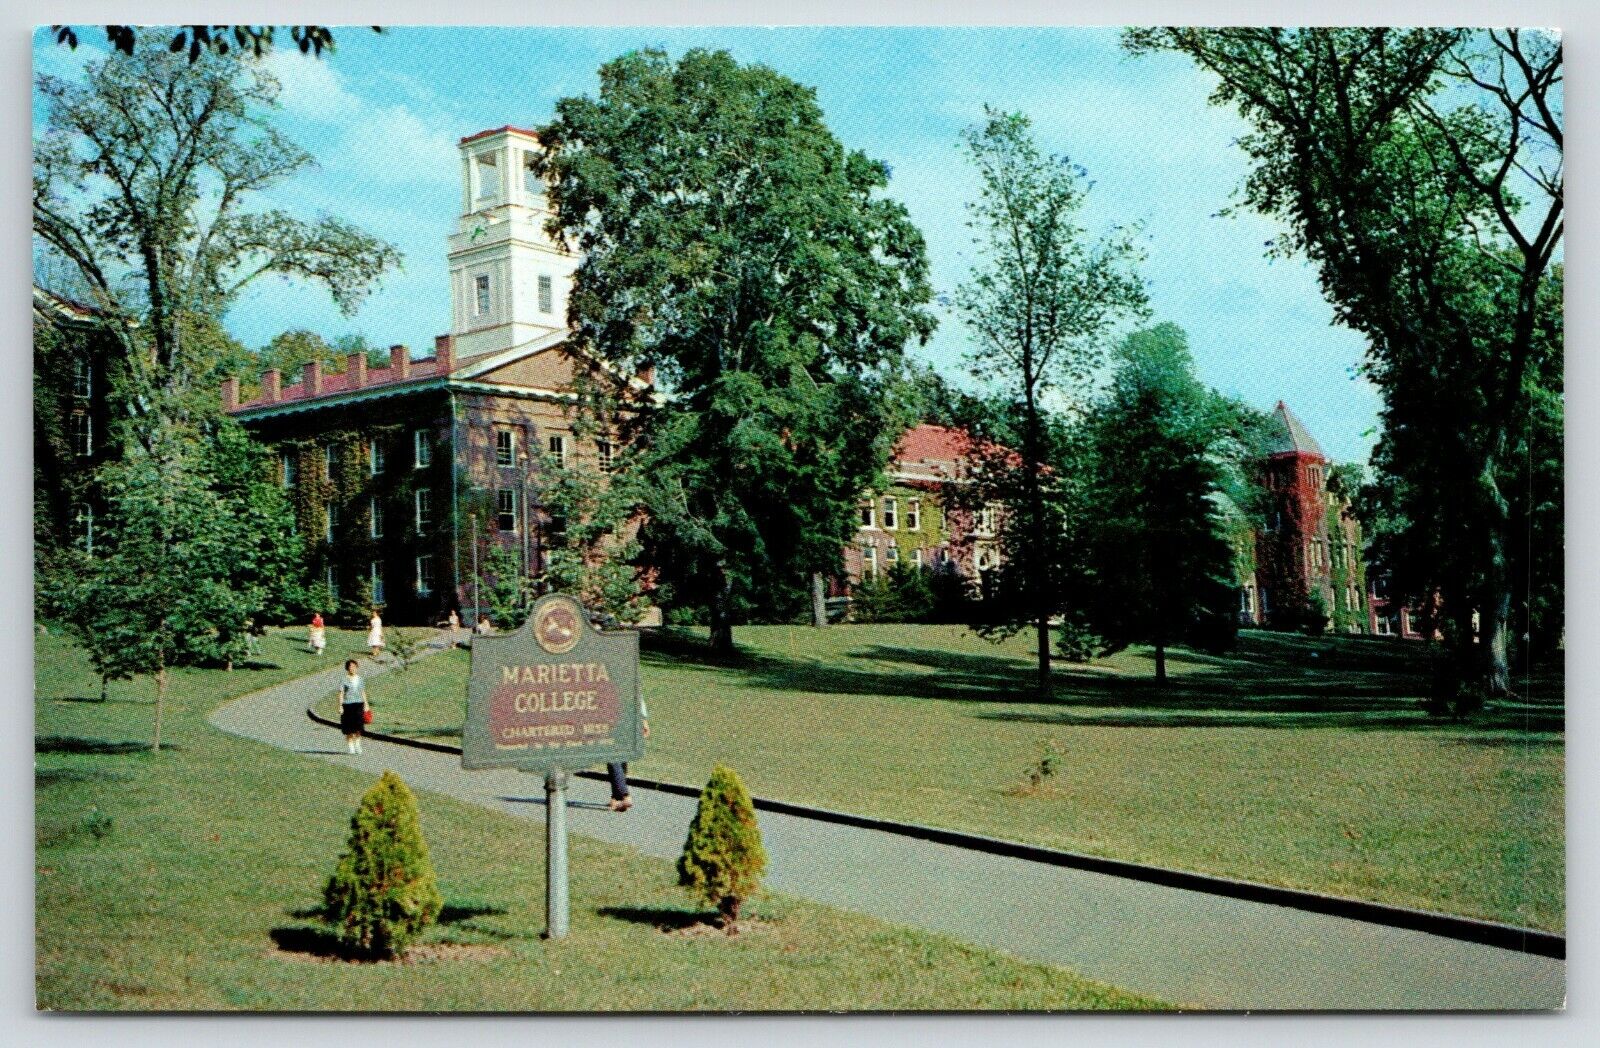 Marietta College Ohio~Founded 1797 Chartered 1835~Double Square Tower~Sign 1960s